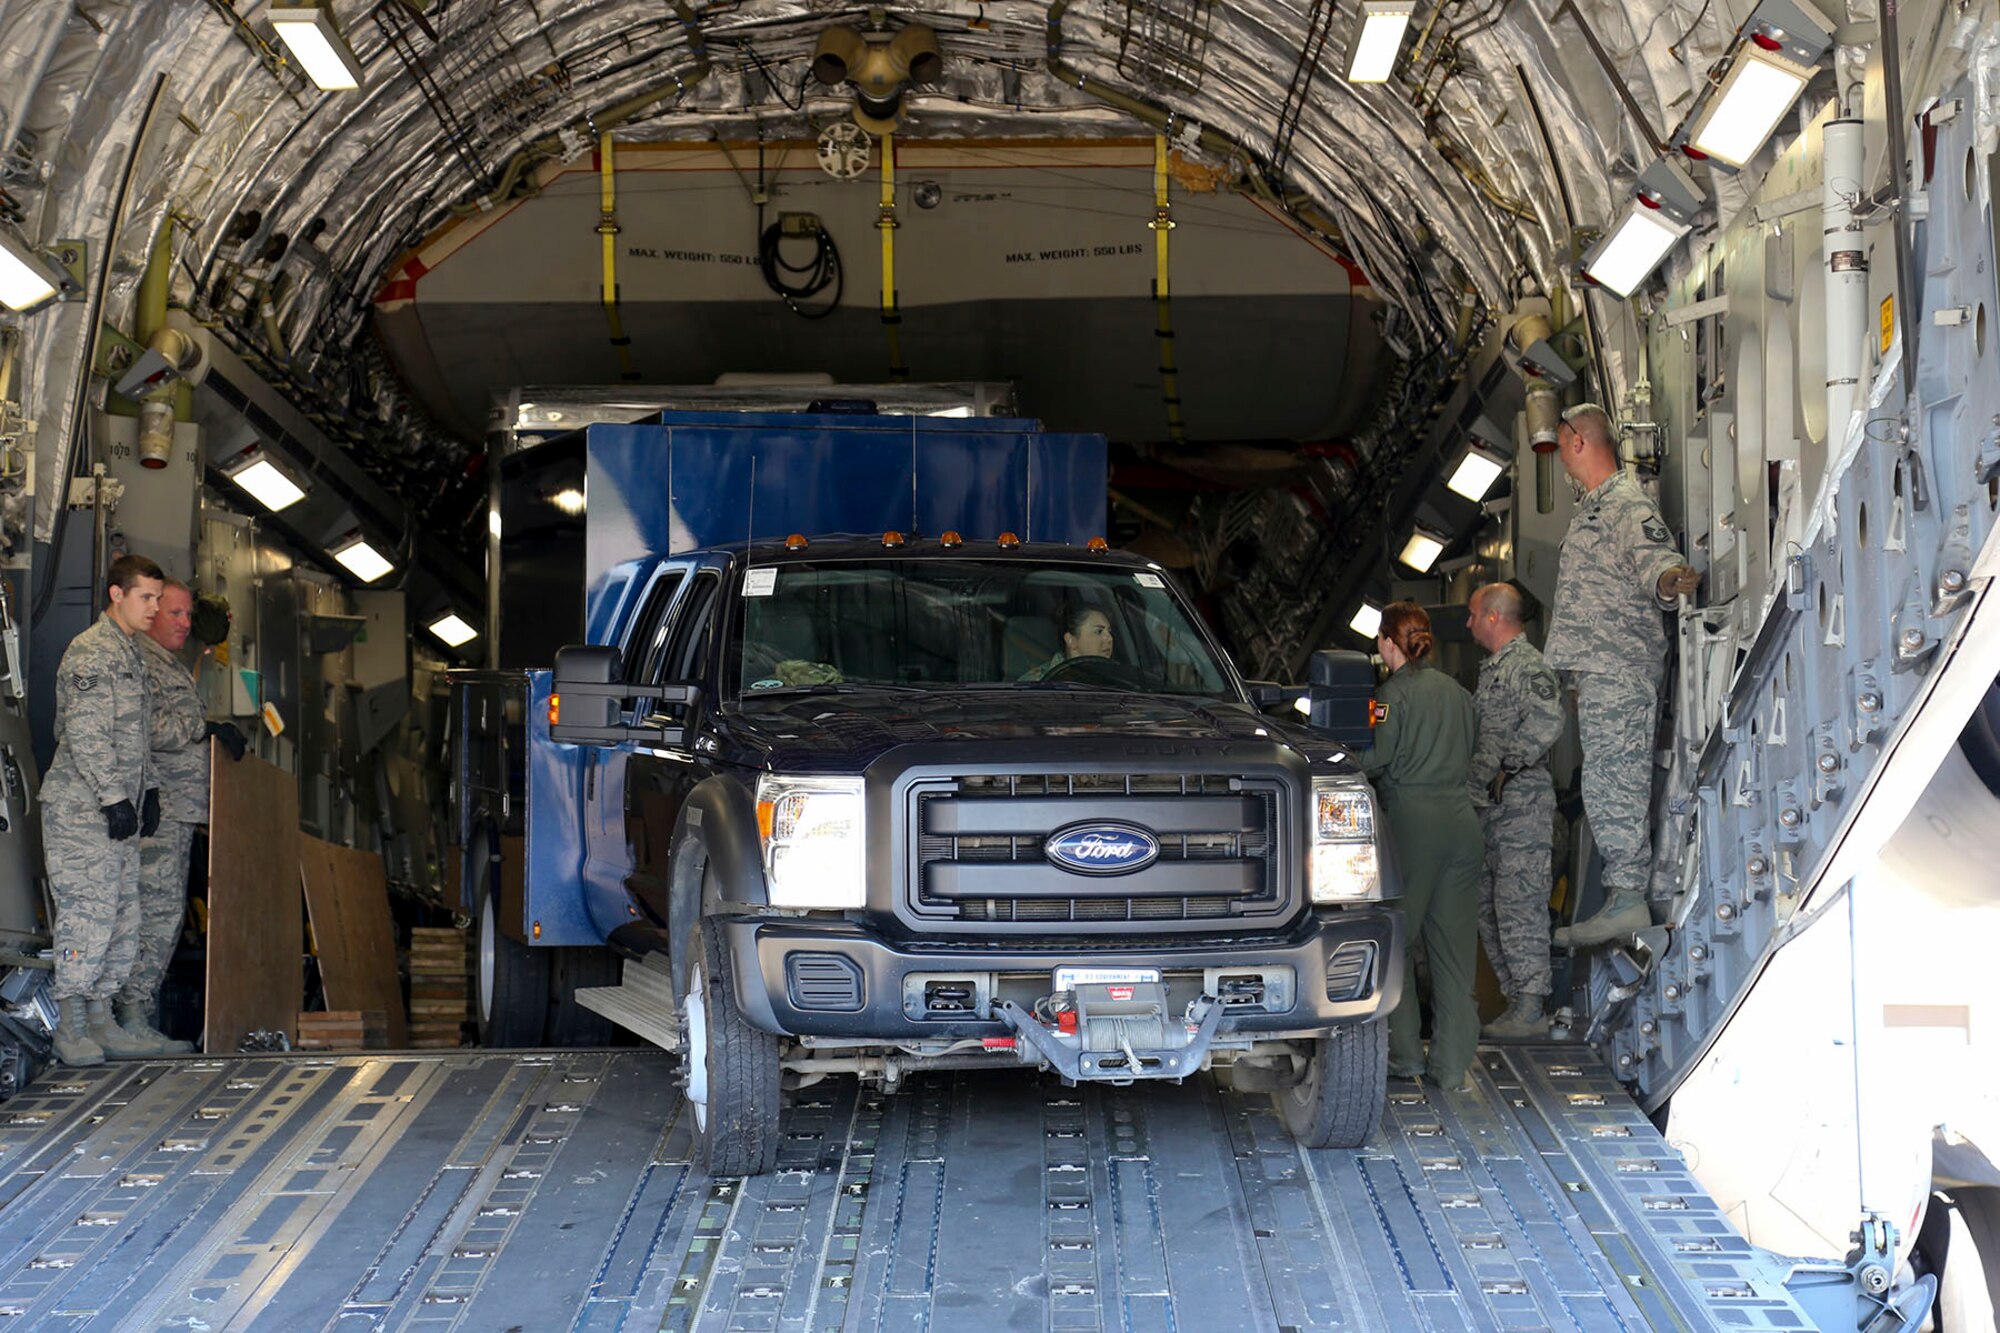 Alaska Guard Master Sgt. Nina Kolyvanova, 103rd Civil Support Team (Weapons of Mass Destruction) training noncommissioned officer, backs the operations truck and trailer onto a C-17 Globemaster III aircraft crewed by the 176th Wing’s 249th Airlift Squadron after interacting and providing outreach to local residents at the Edward G. Pitka Sr. Airport in Galena, Alaska, May 31, 2017. (U.S. Army National Guard photo by Staff Sgt. Balinda O’Neal Dresel)